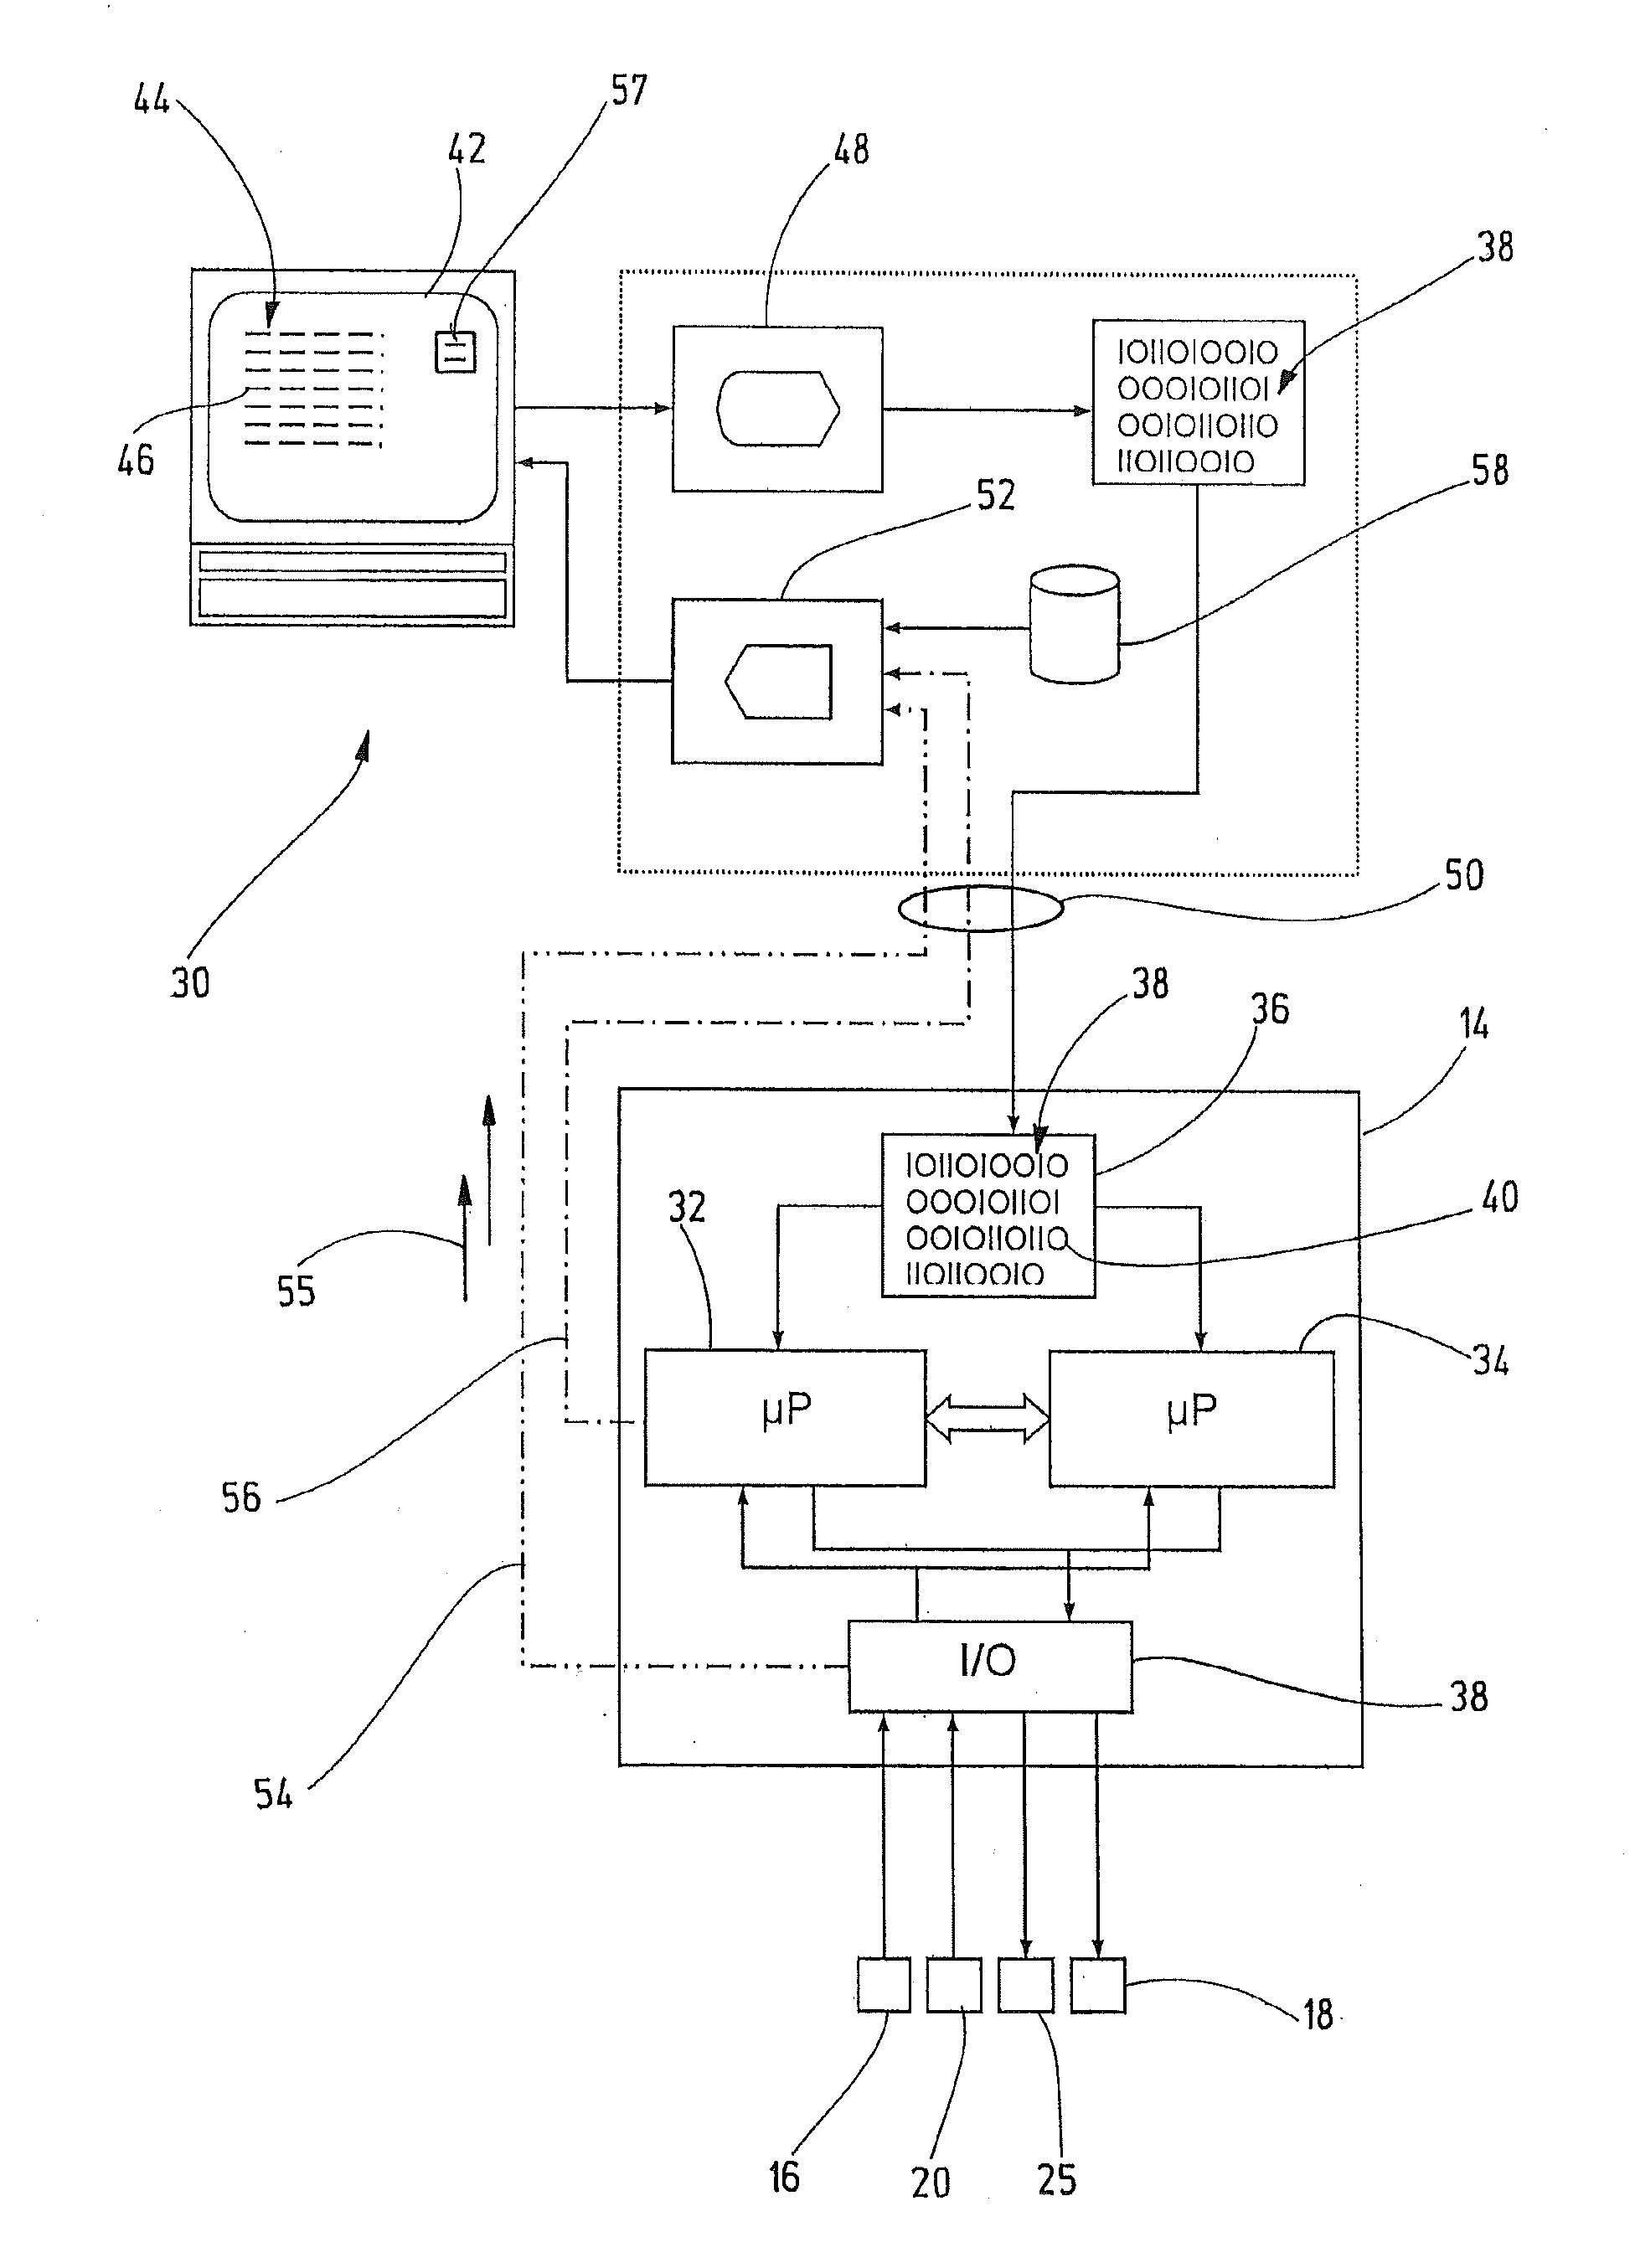 Method and device for programming an industrial controller